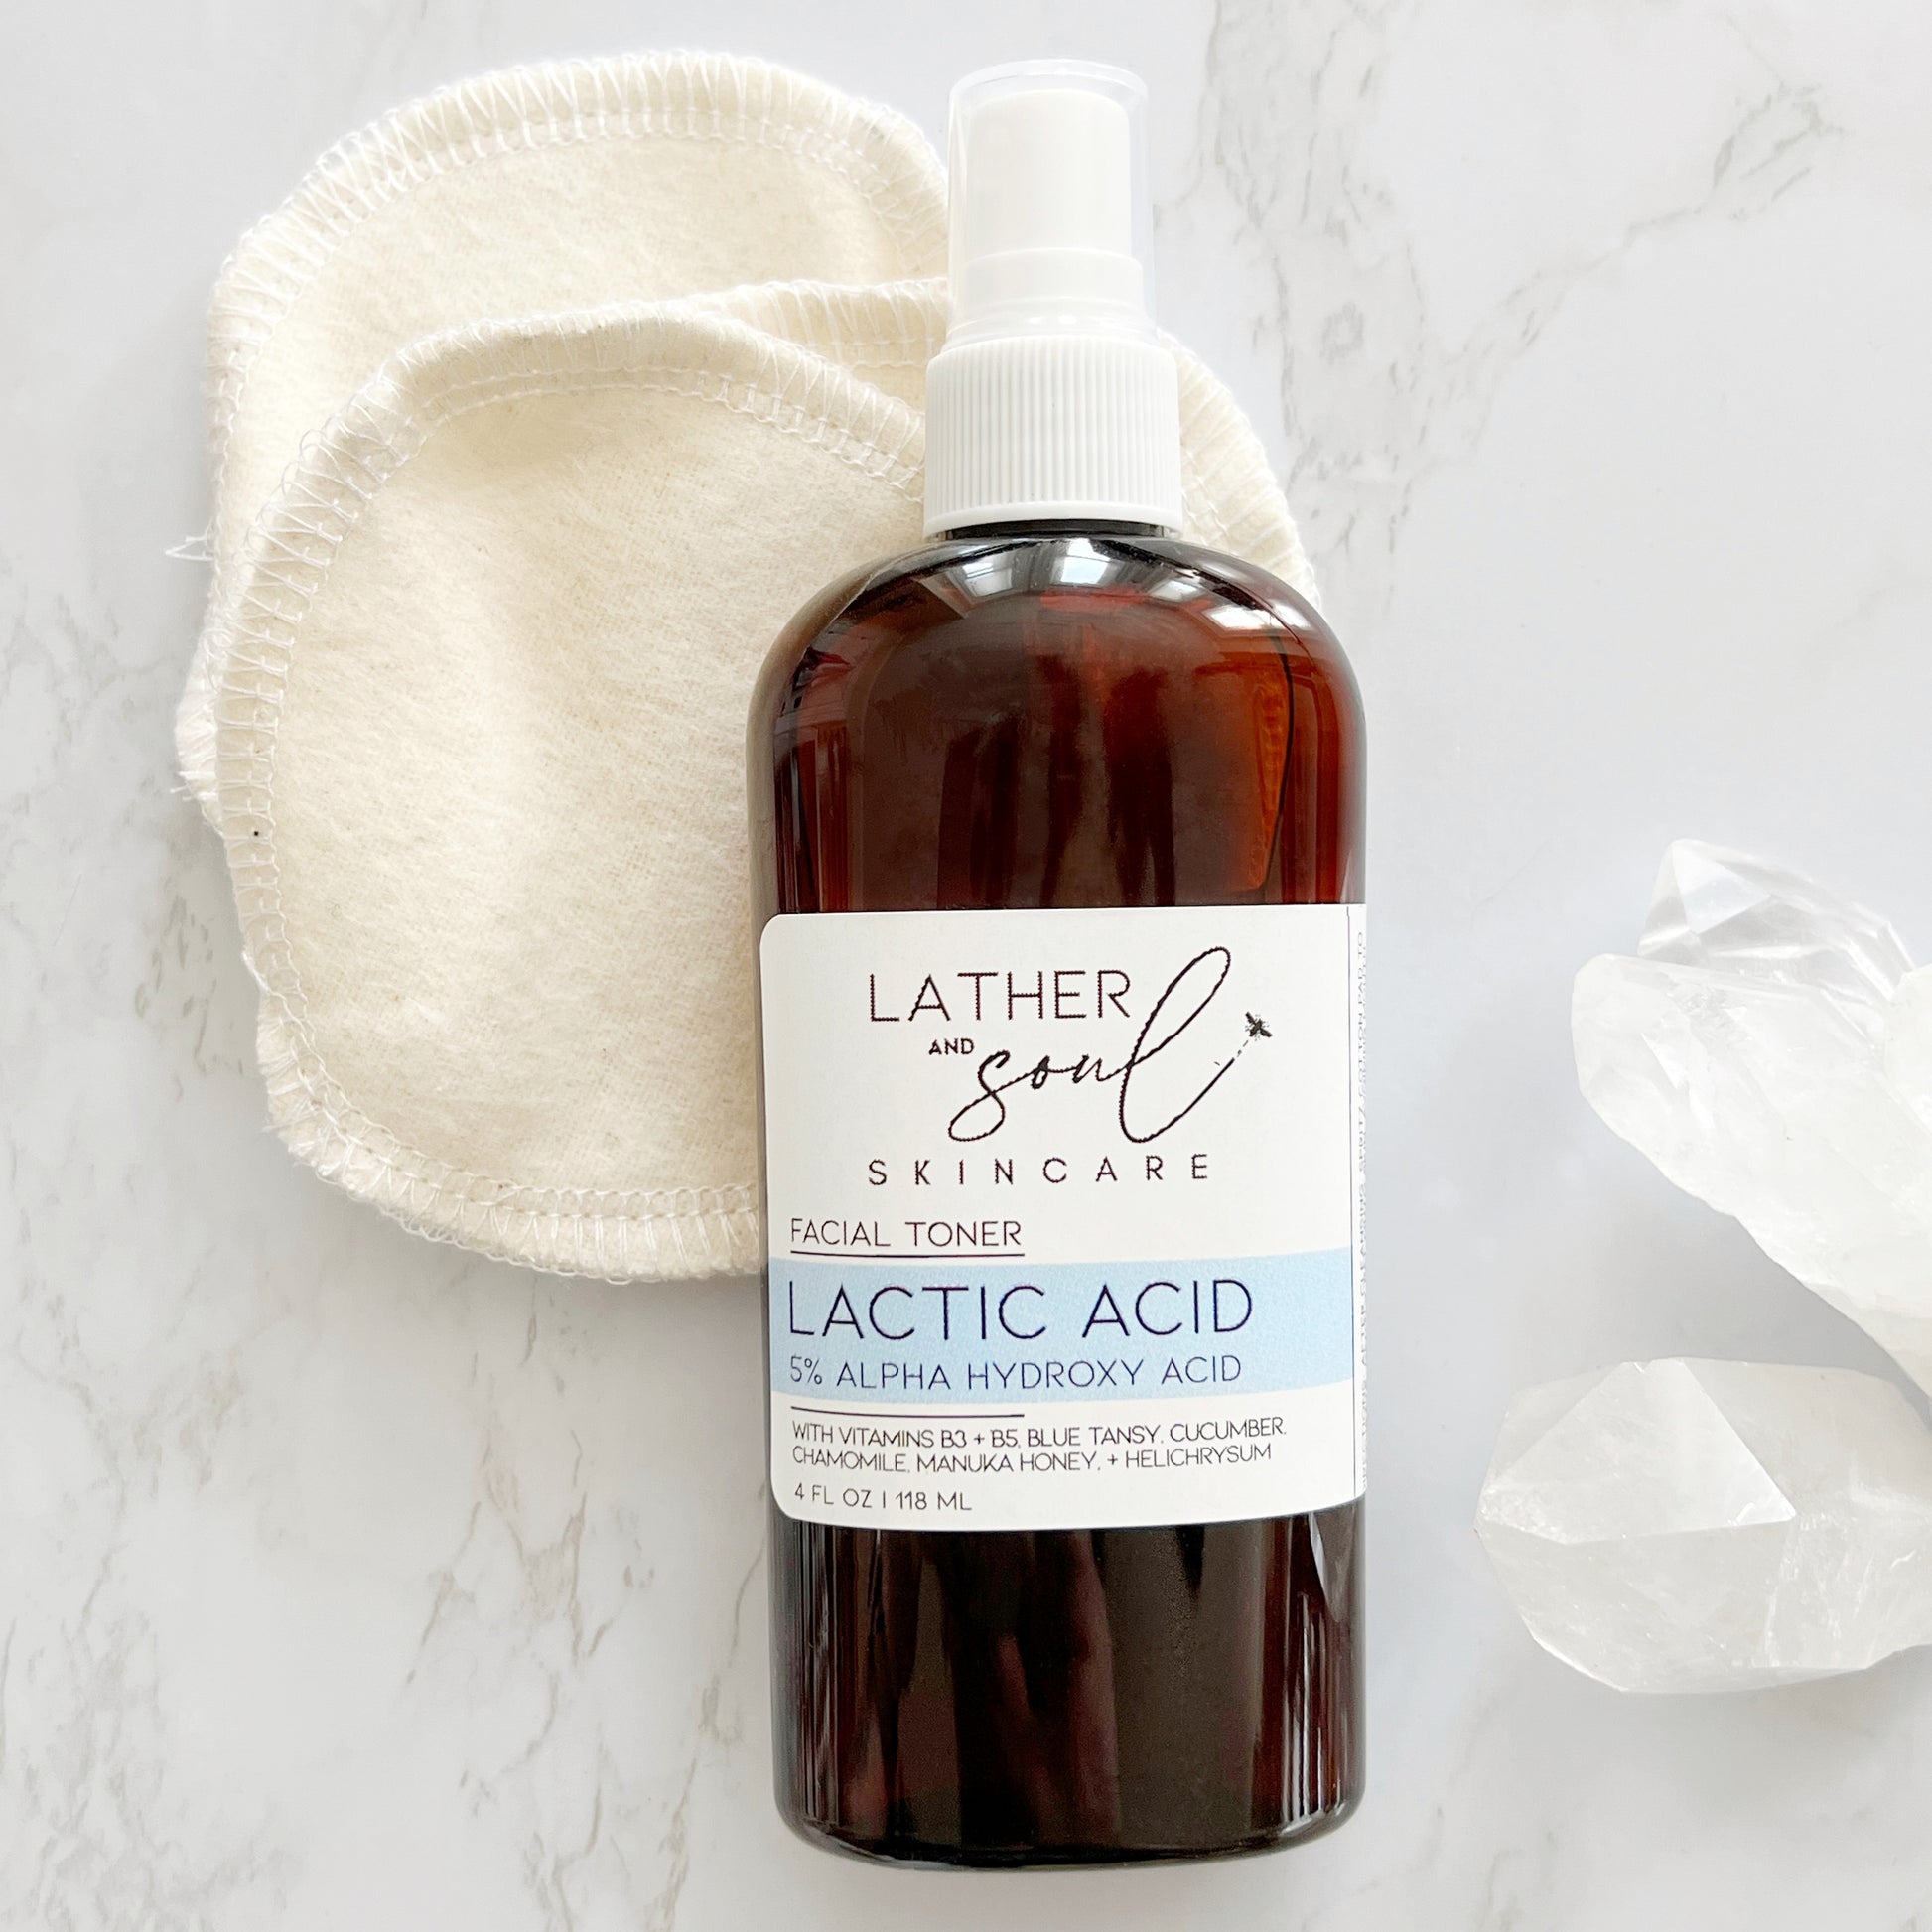 Lactic acid AHA facial toner by Lather and Soul Skincare